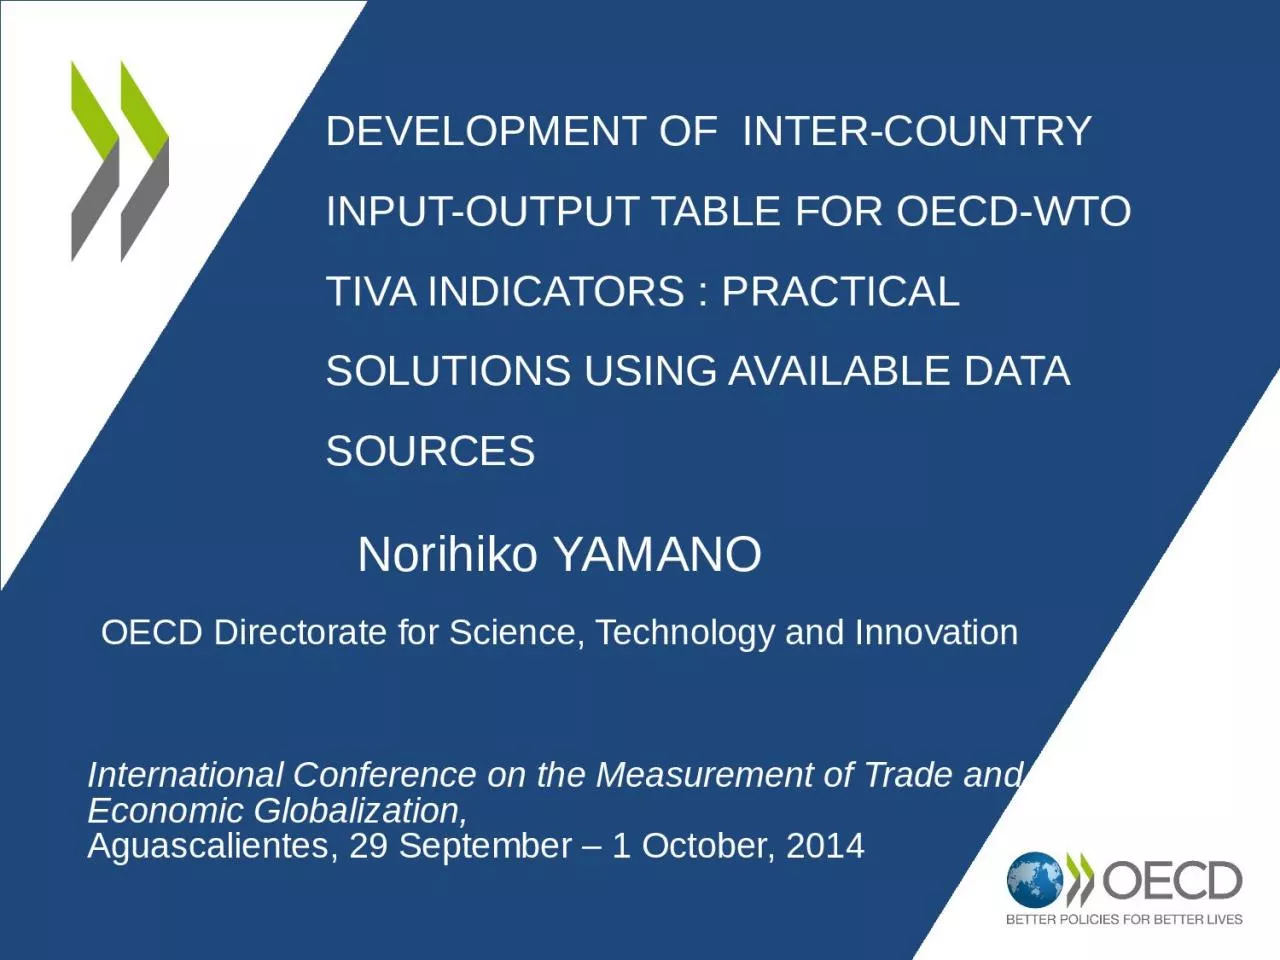 Development of    Inter-country Input-Output Table for OECD-WTO